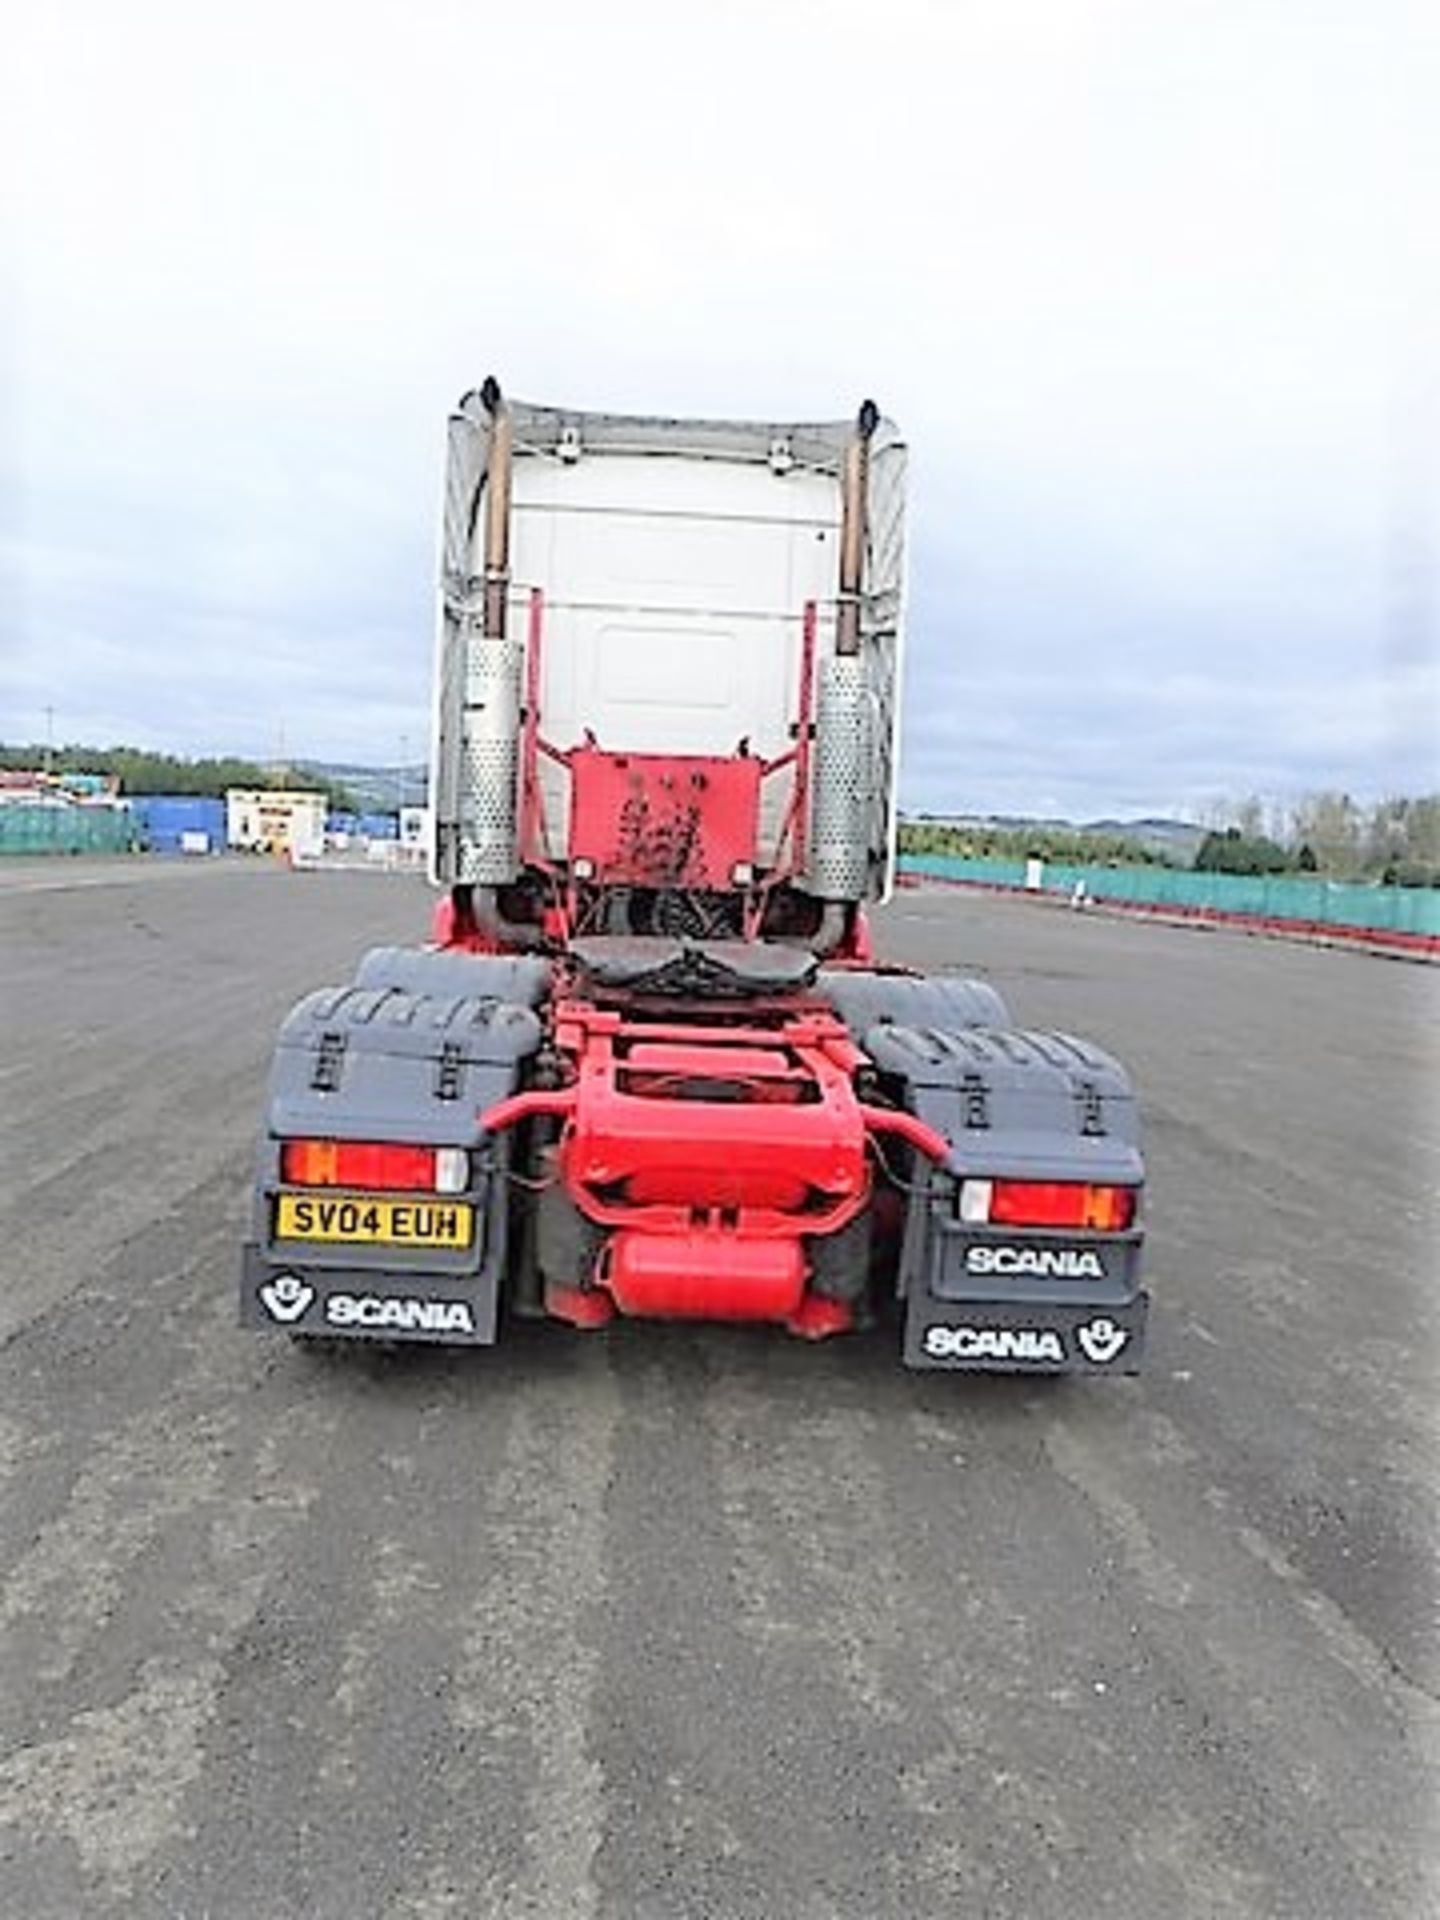 SCANIA 4 SRS L-CLASS - 15607cc - Image 14 of 20